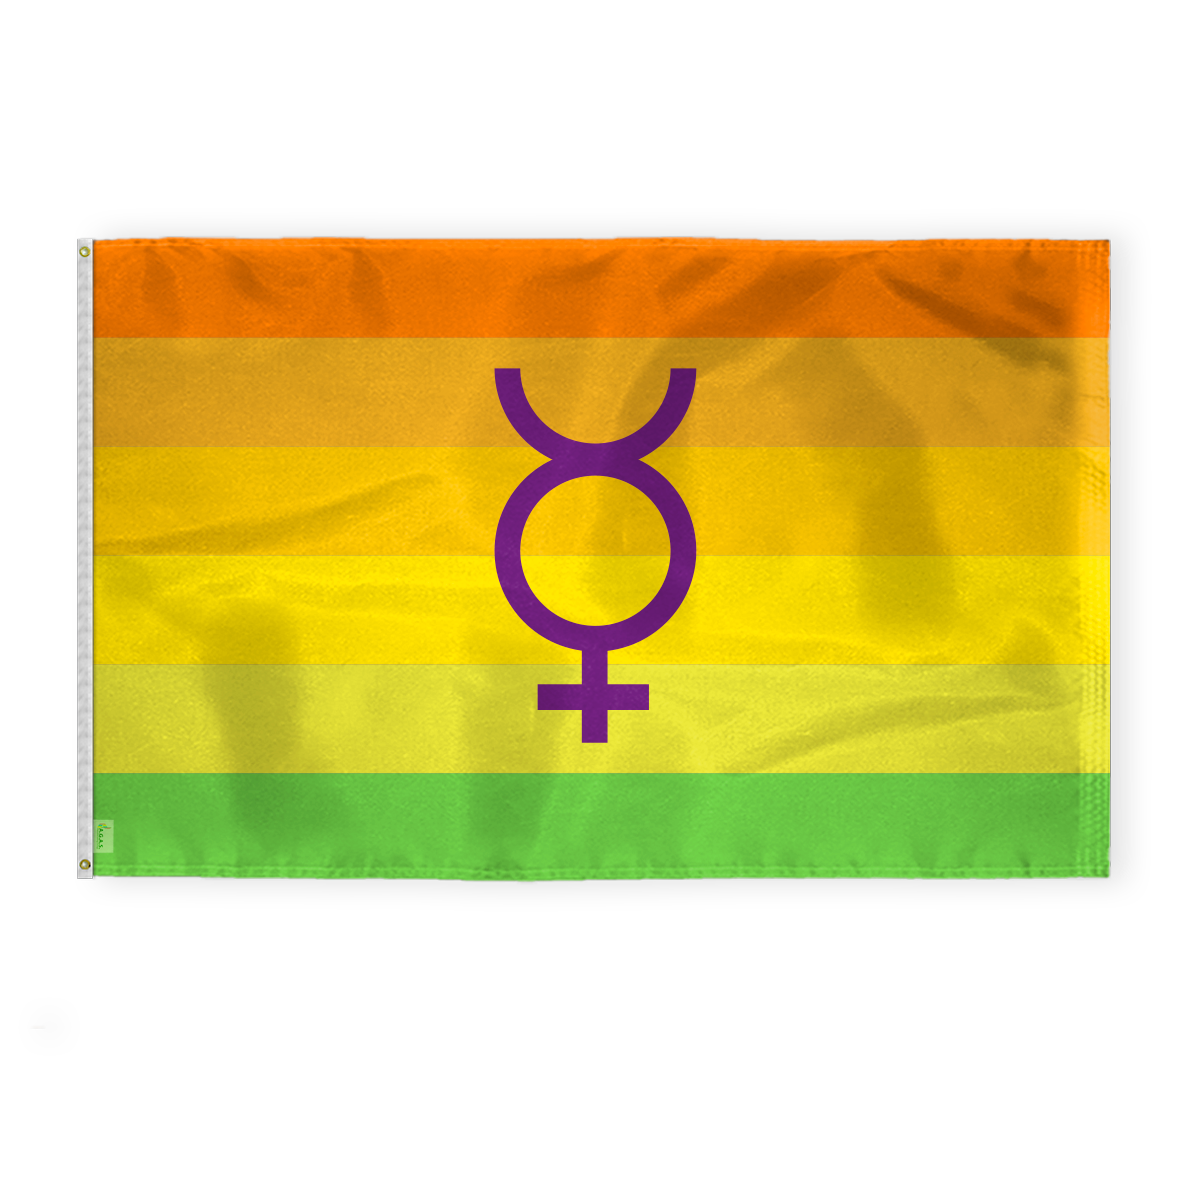 AGAS Hermaphrodite Pride Flag 4x6 Ft - Double Sided Printed 200D Nylon